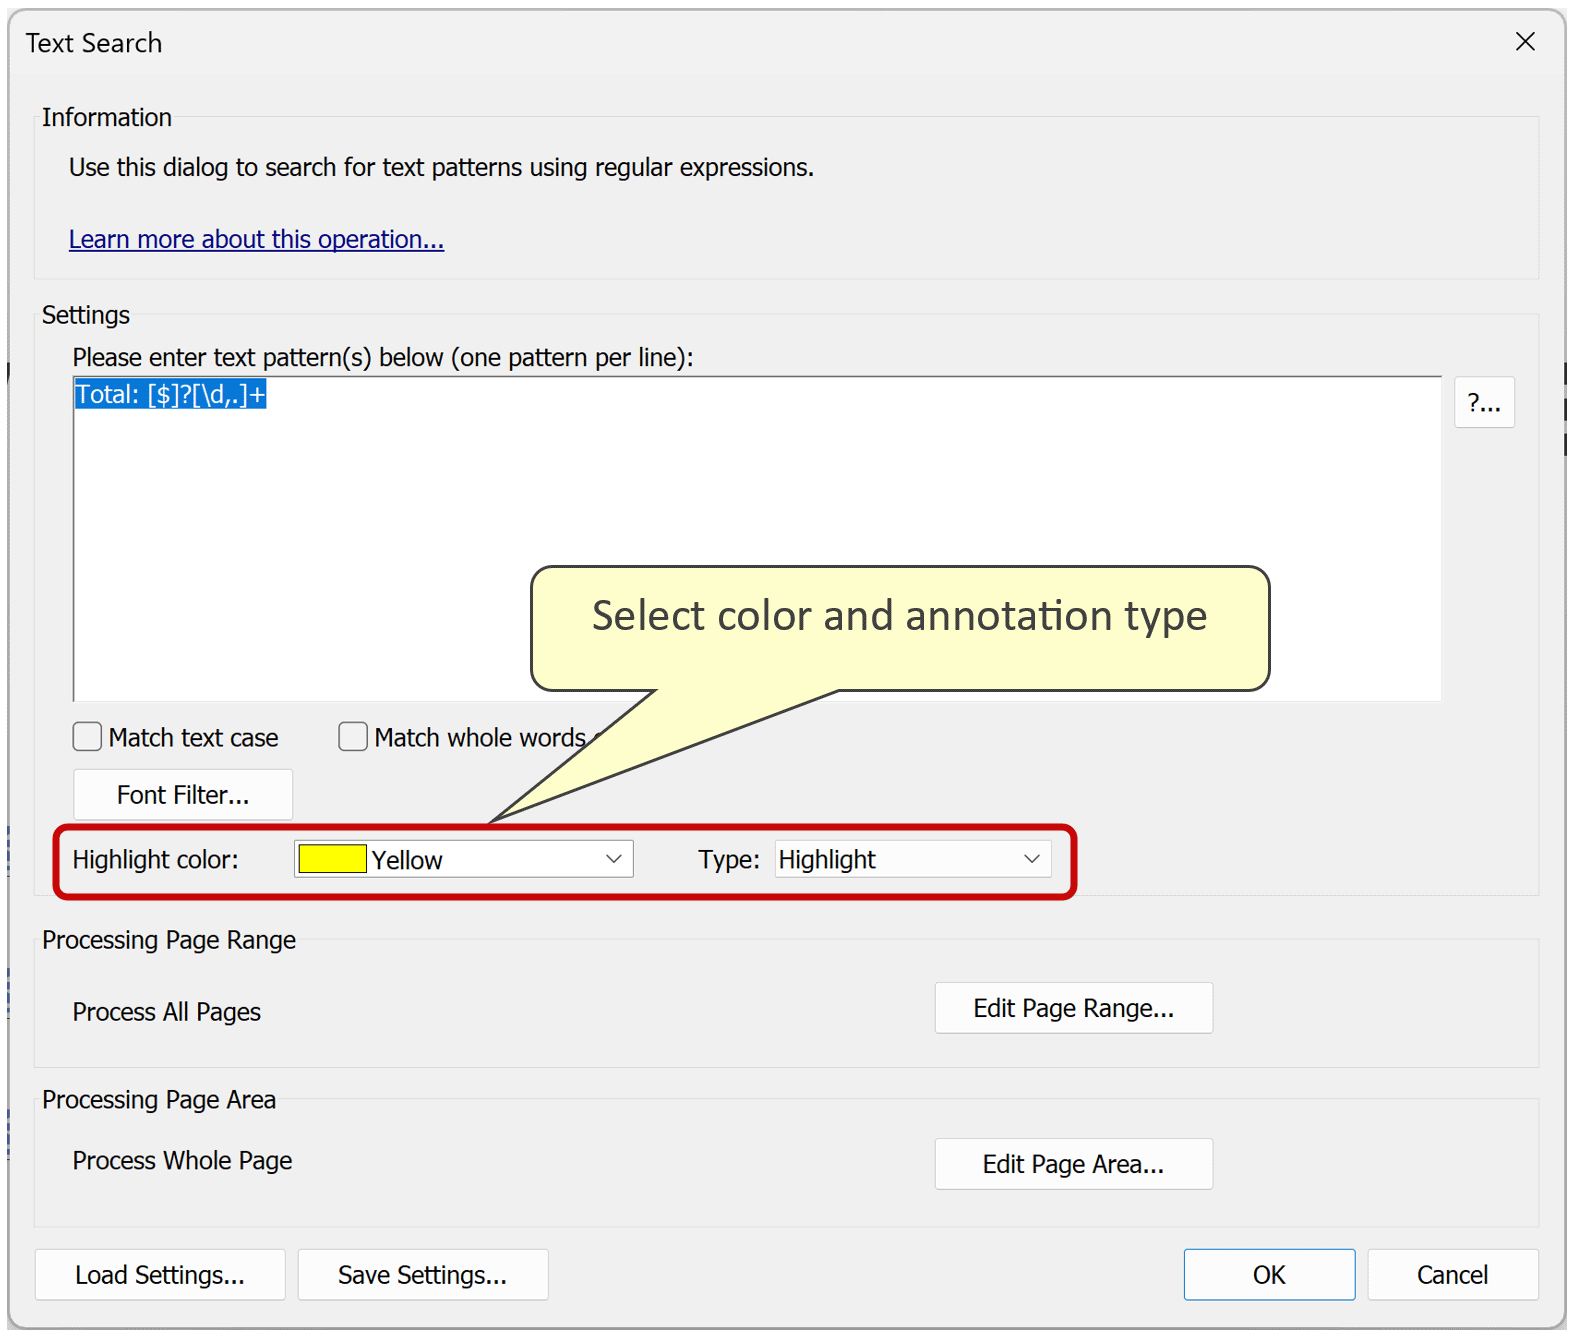 Select highlight color and annotation type